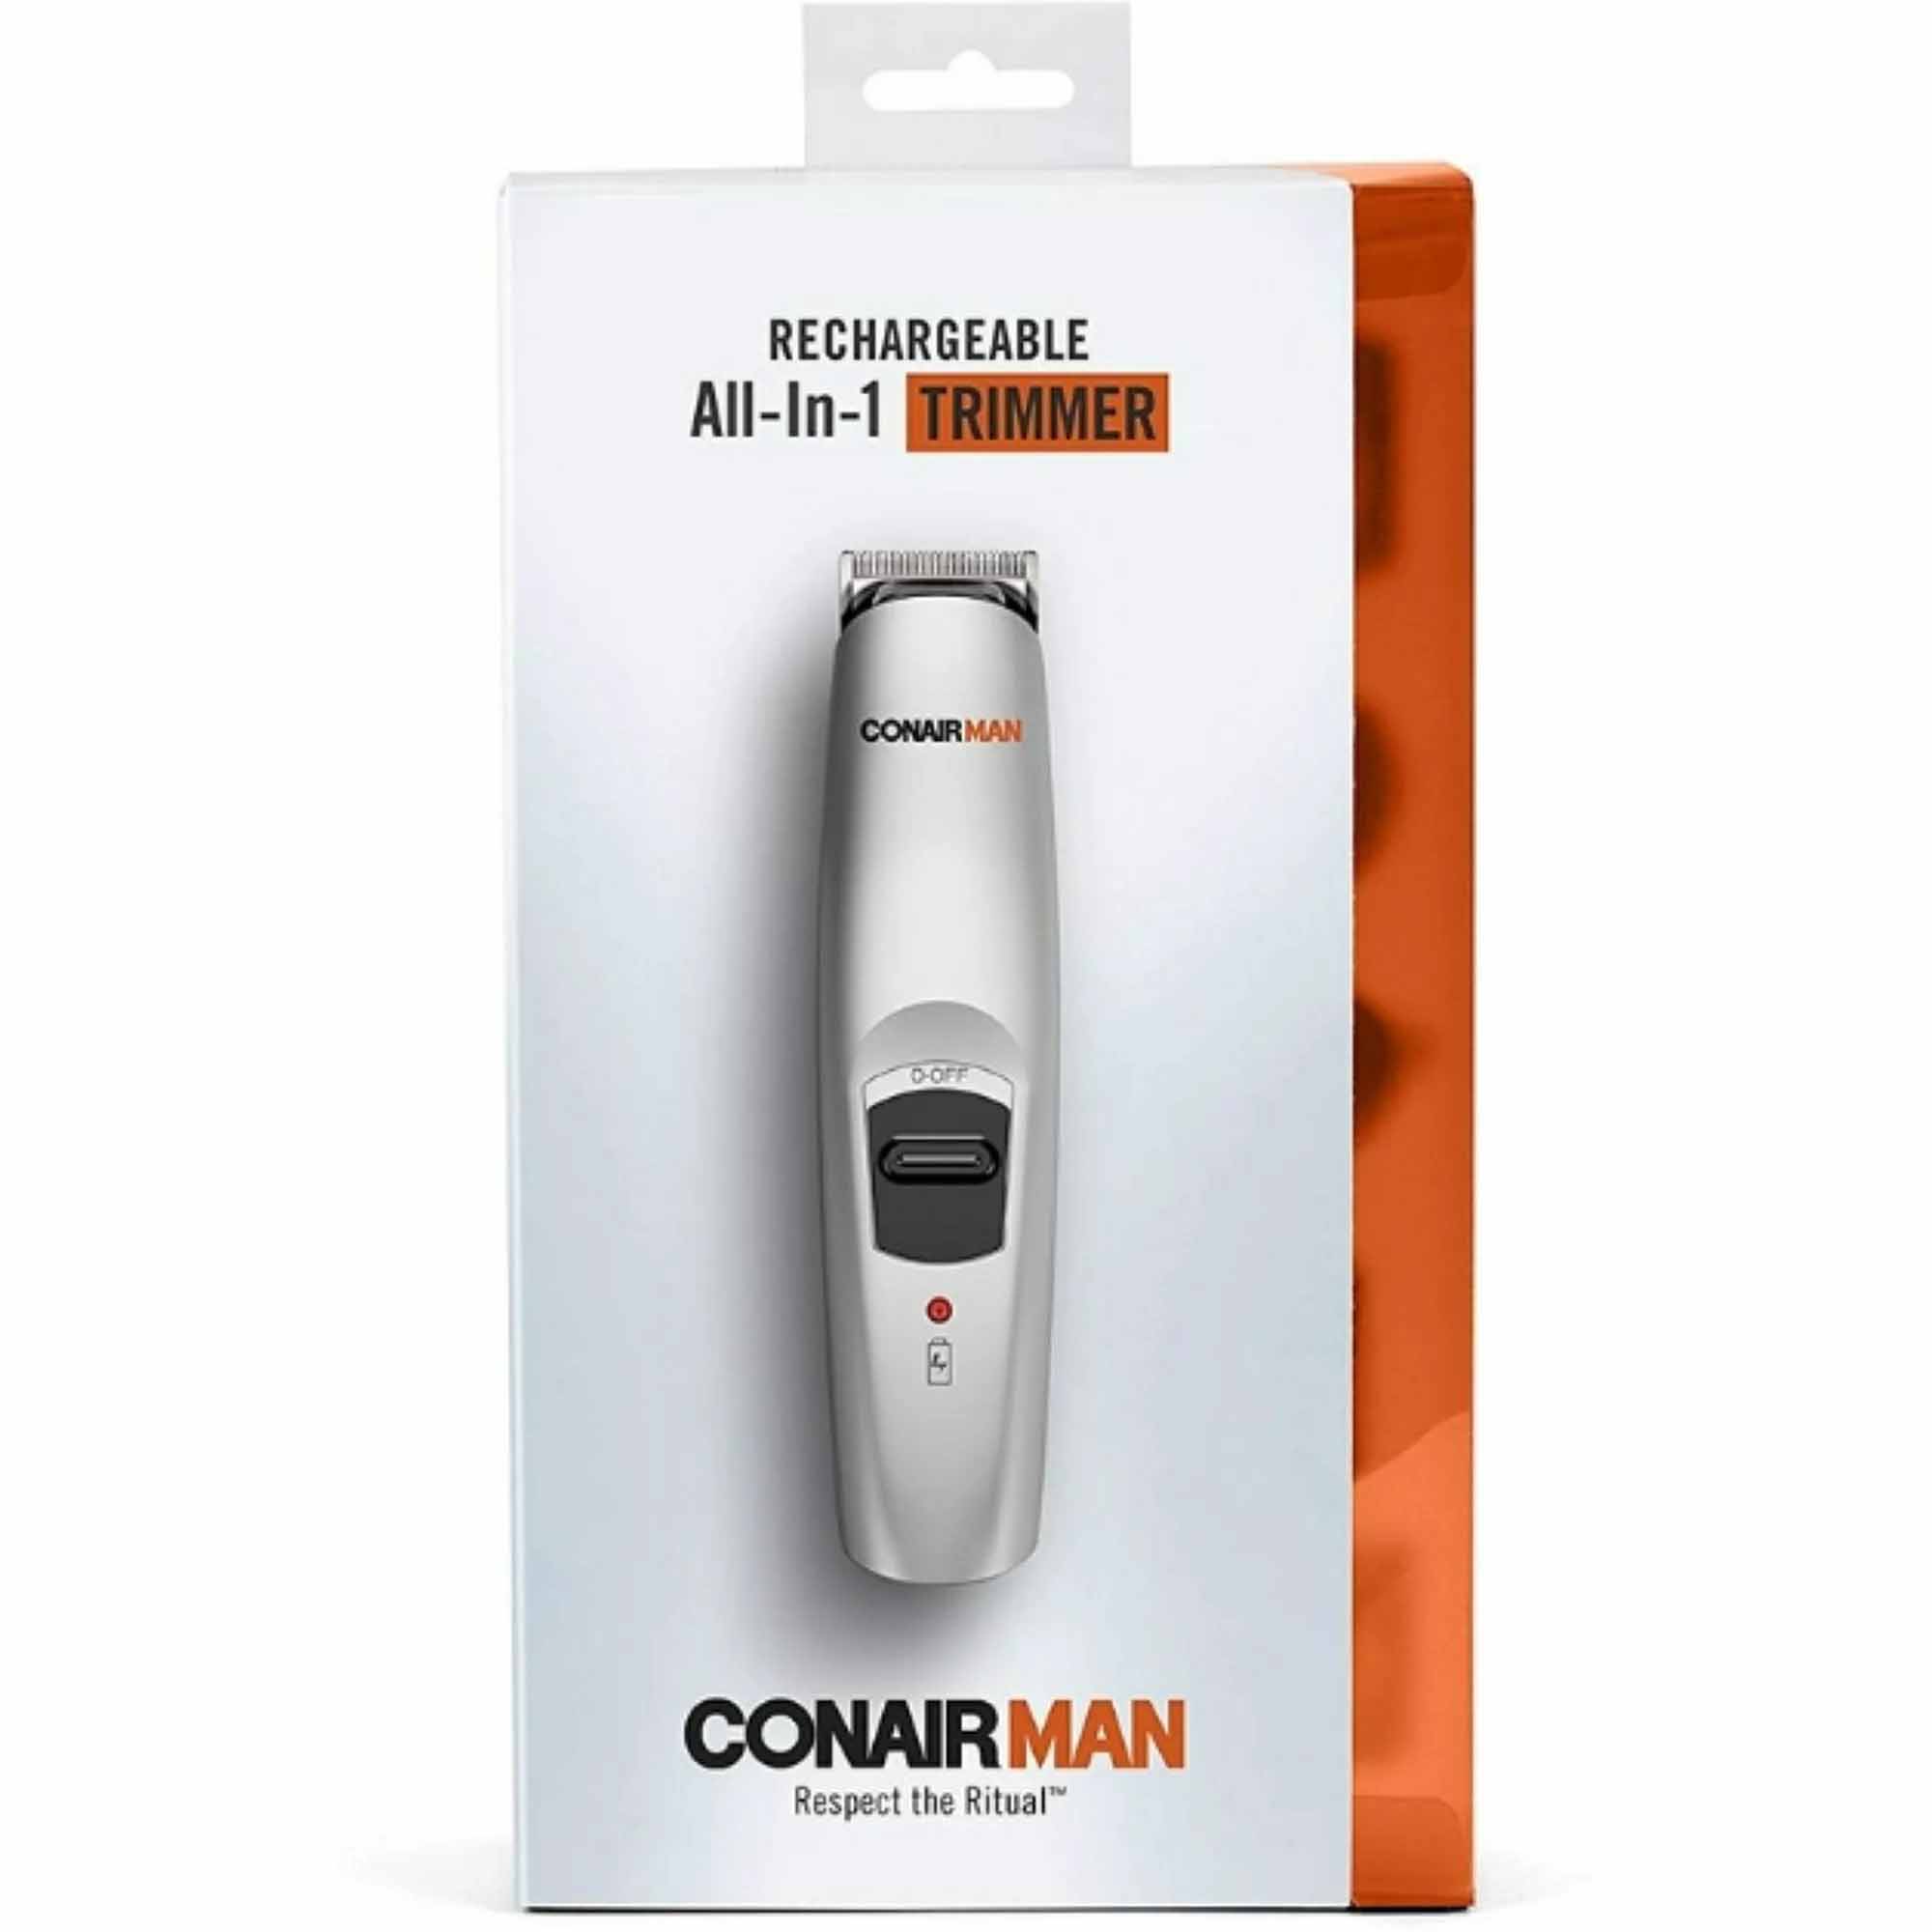 Conair Man Rechargeable All-In-1 Trimmer in silver